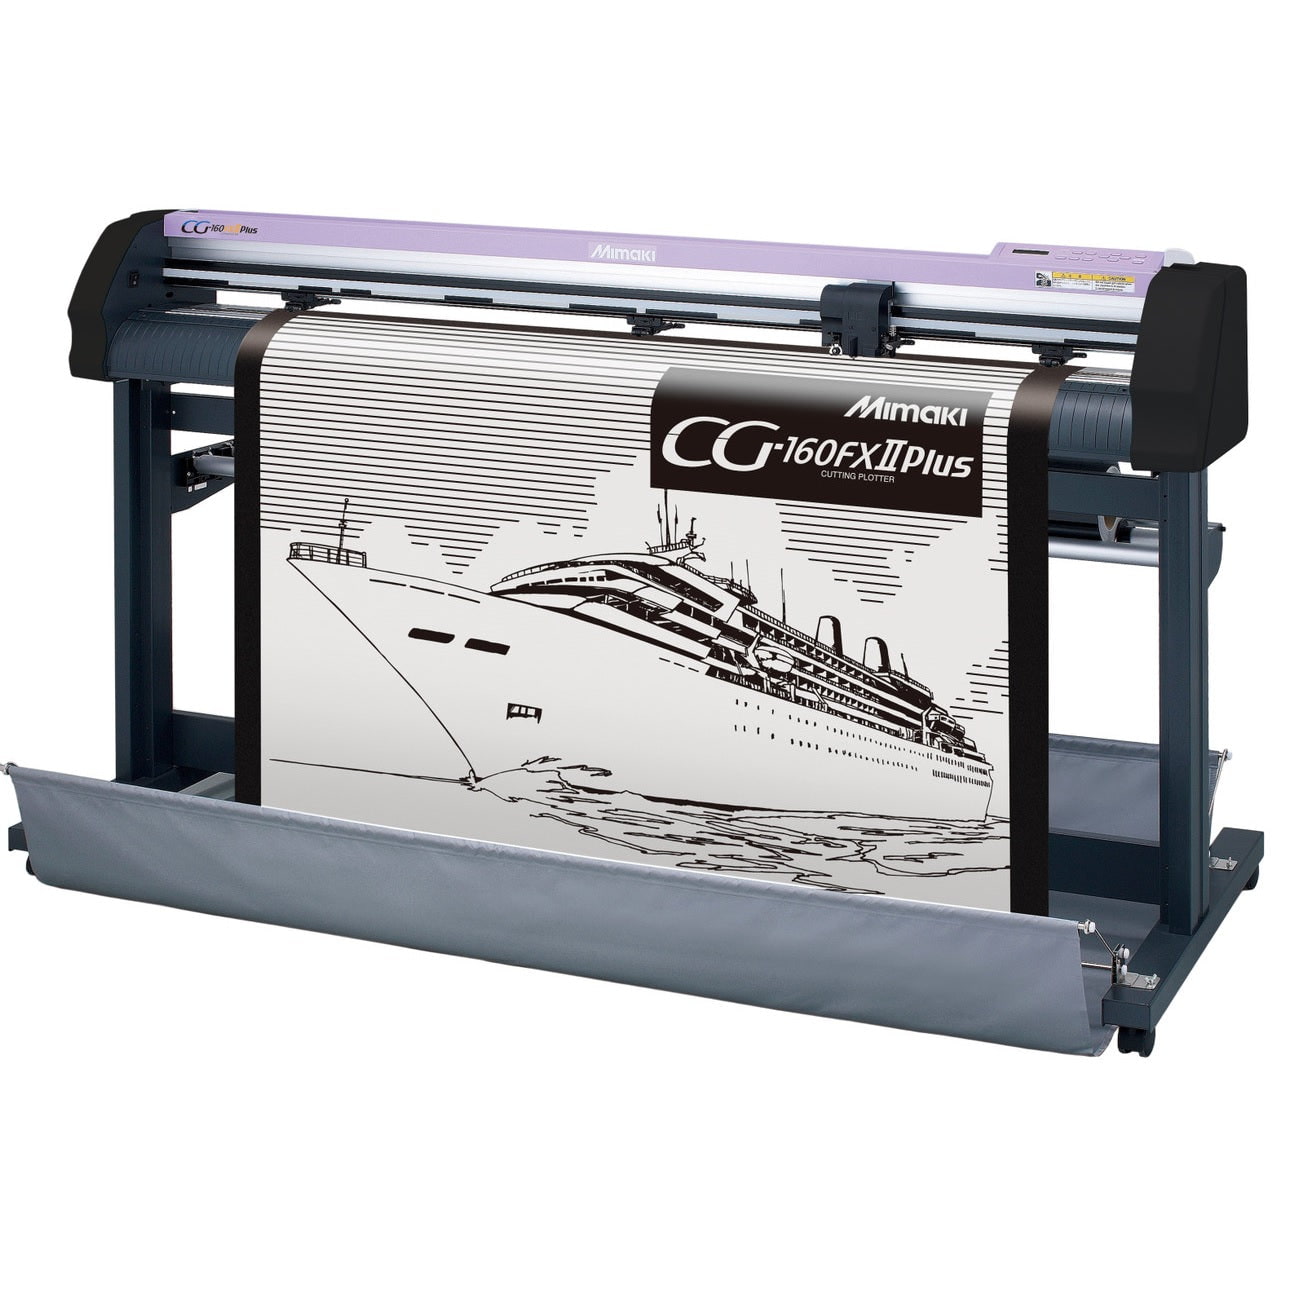 Absolute Toner Mimaki CG-160FXII Plus 74" Media Size Roll to Roll Cutting Plotter With Max Cutting Size 63" Inch Print and Cut Plotters